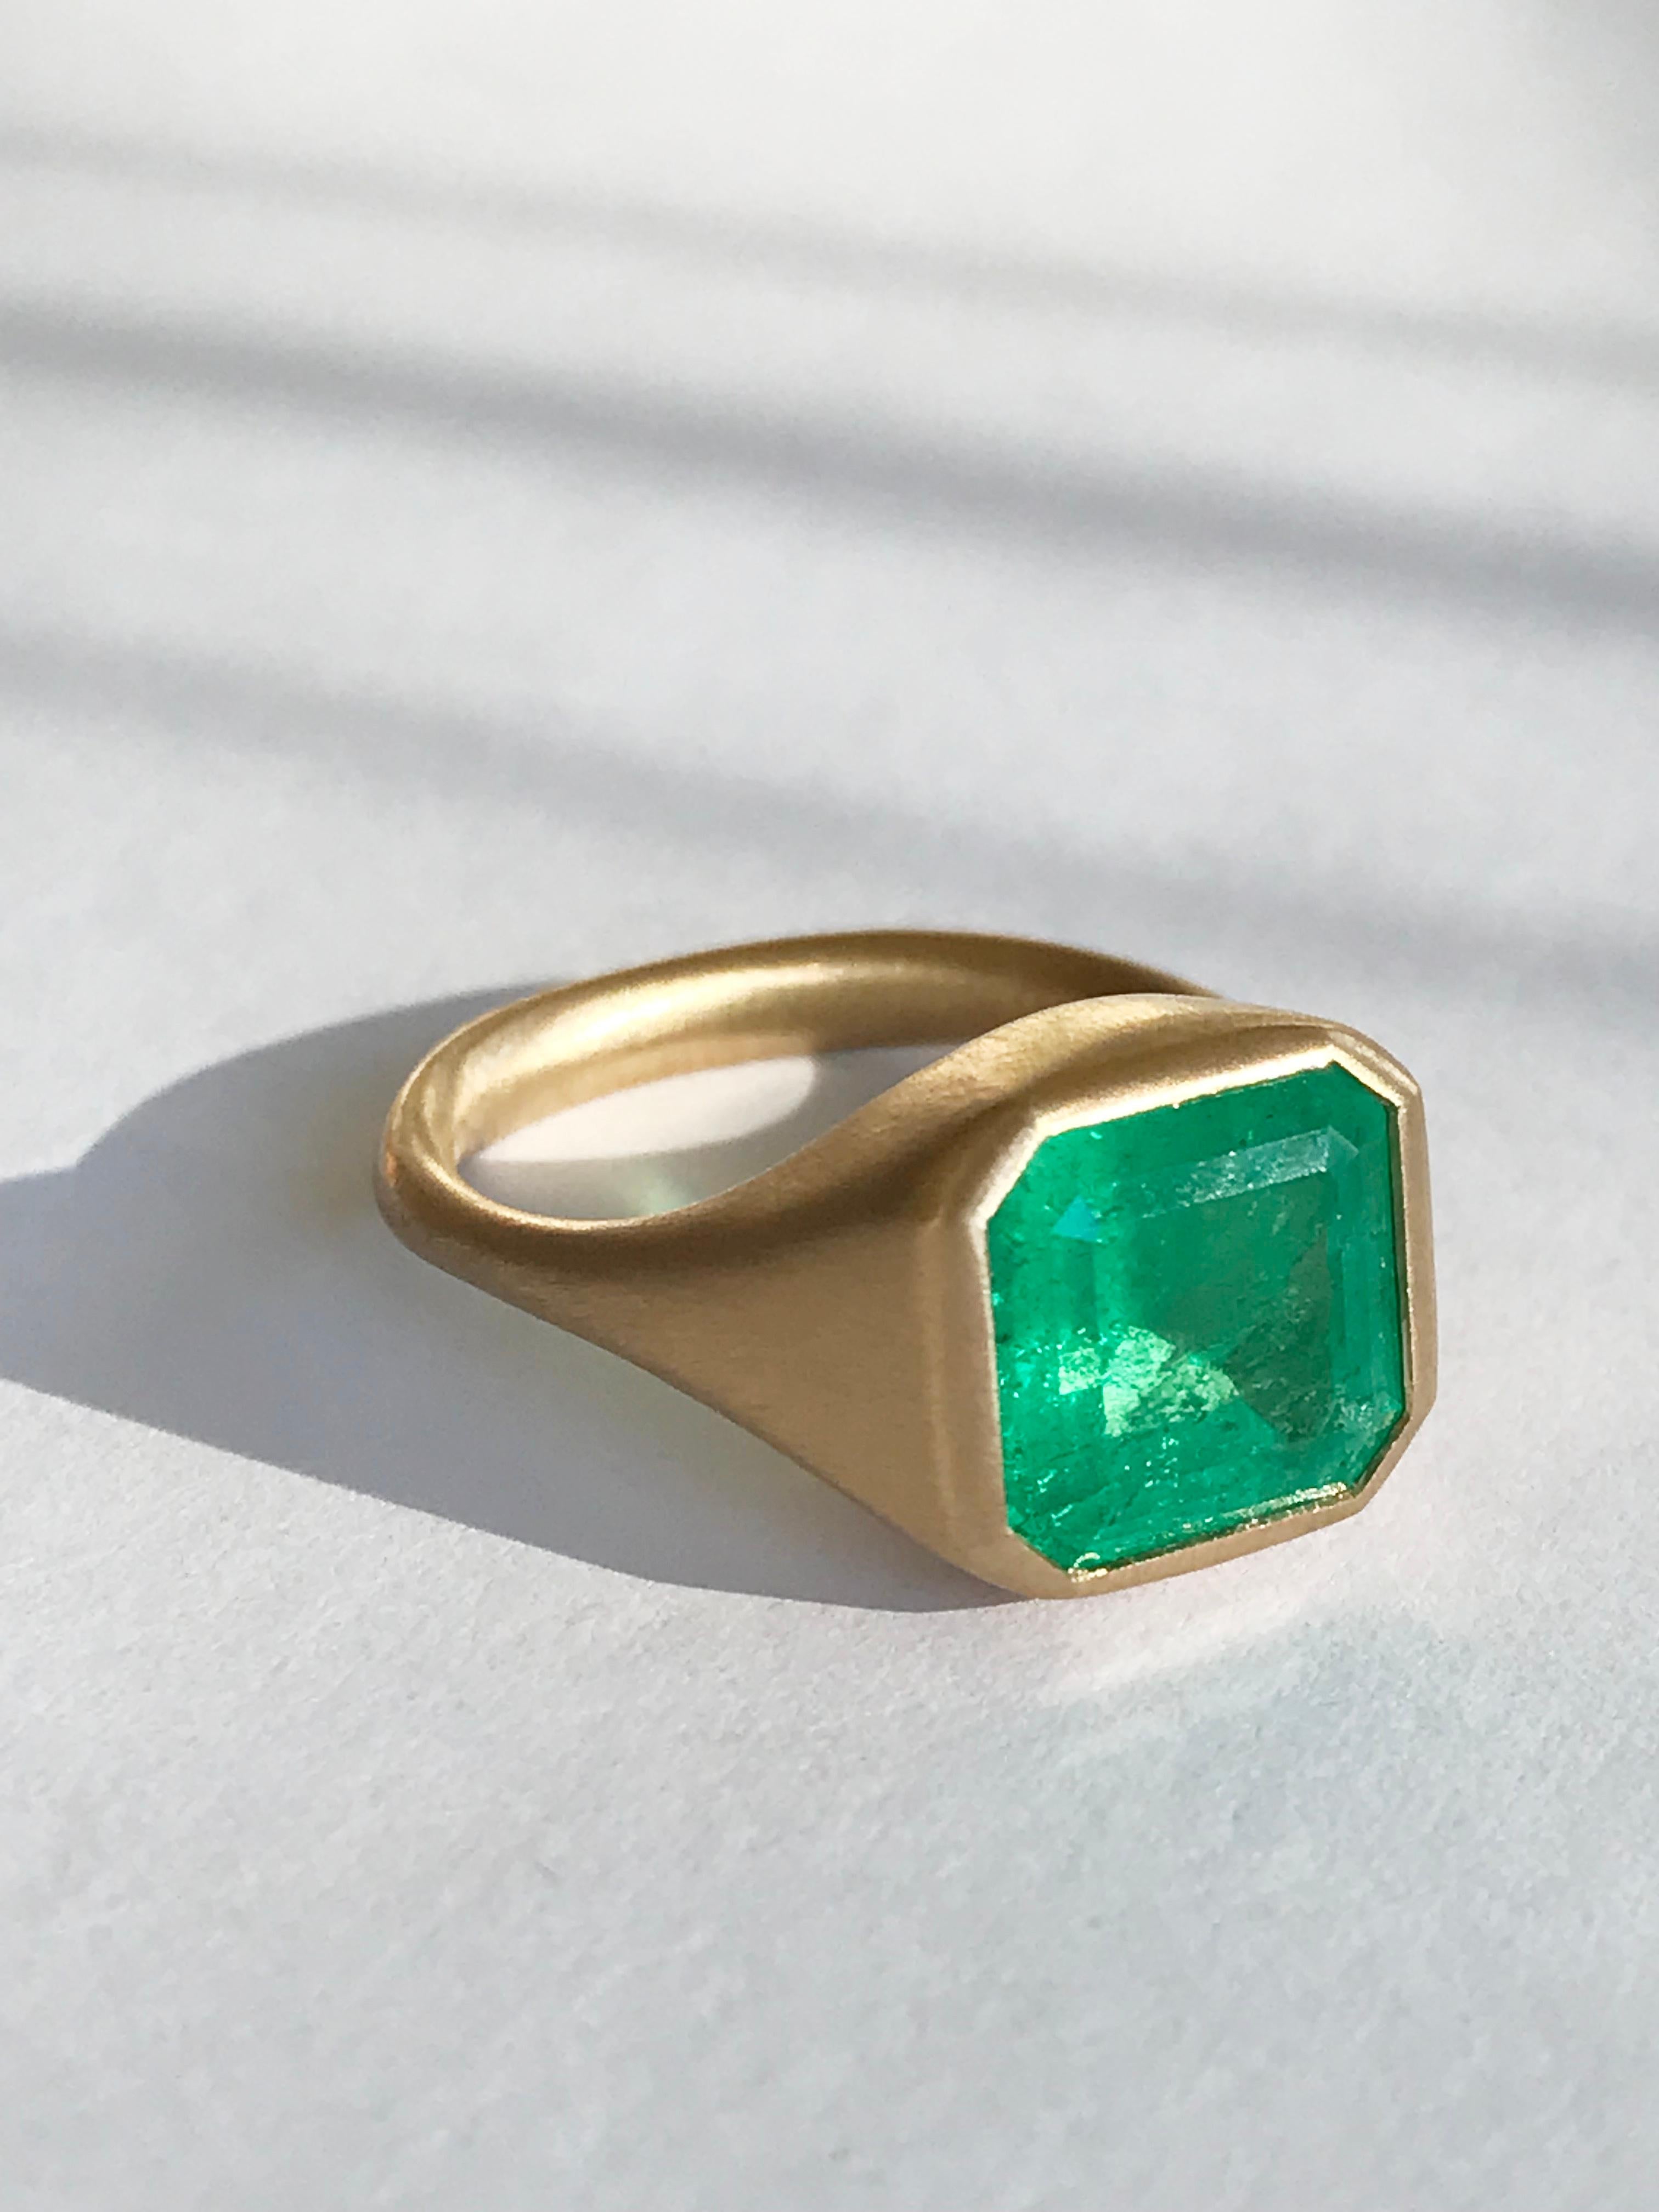 Dalben 4, 12 Carat Colombian Emerald Yellow Gold Ring For Sale 7